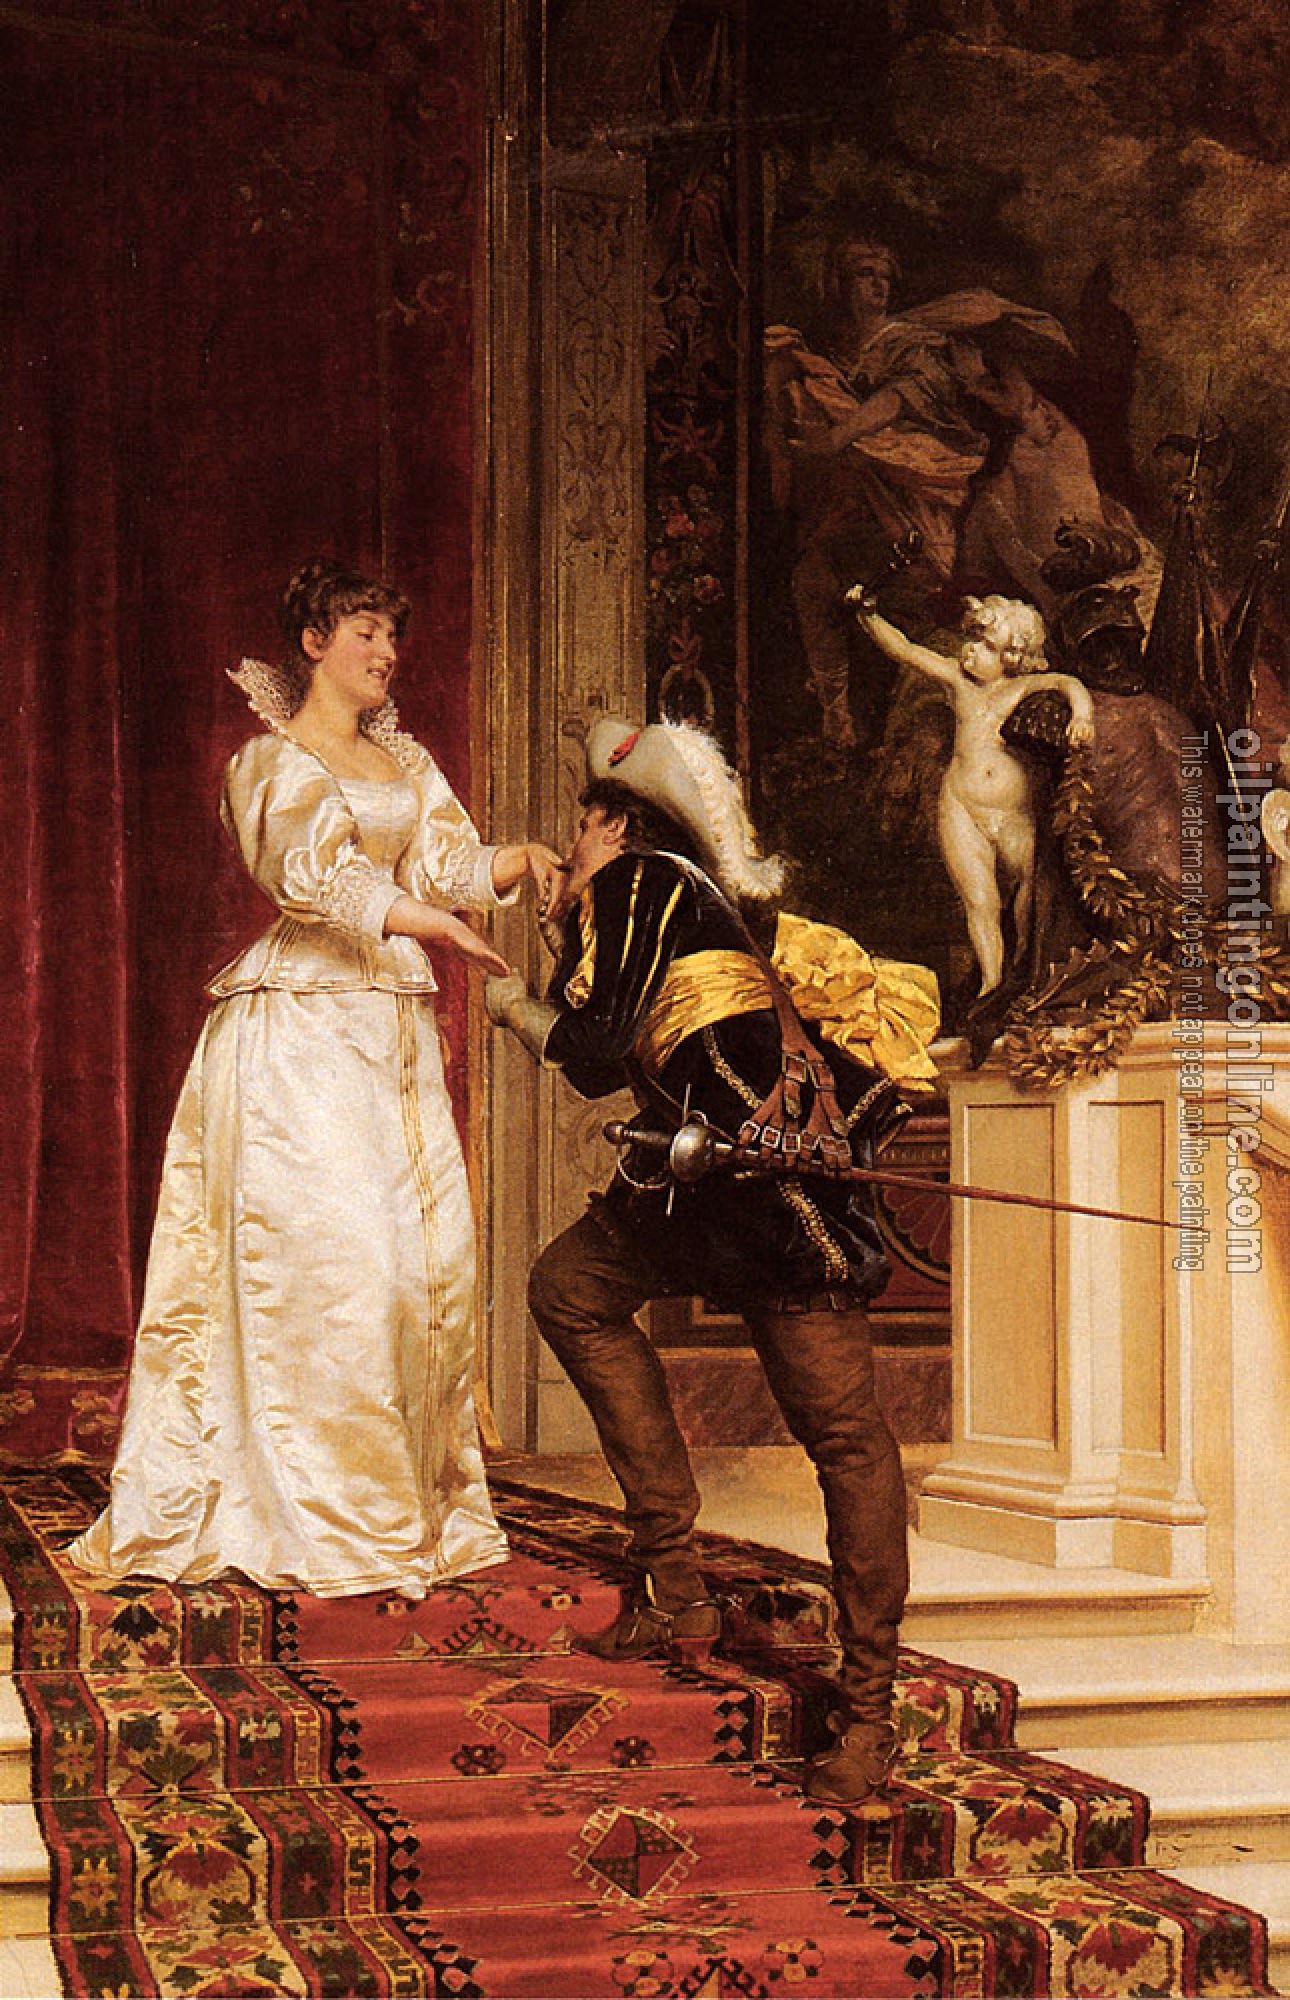 Soulacroix, Frederic - The Cavalier's Kiss